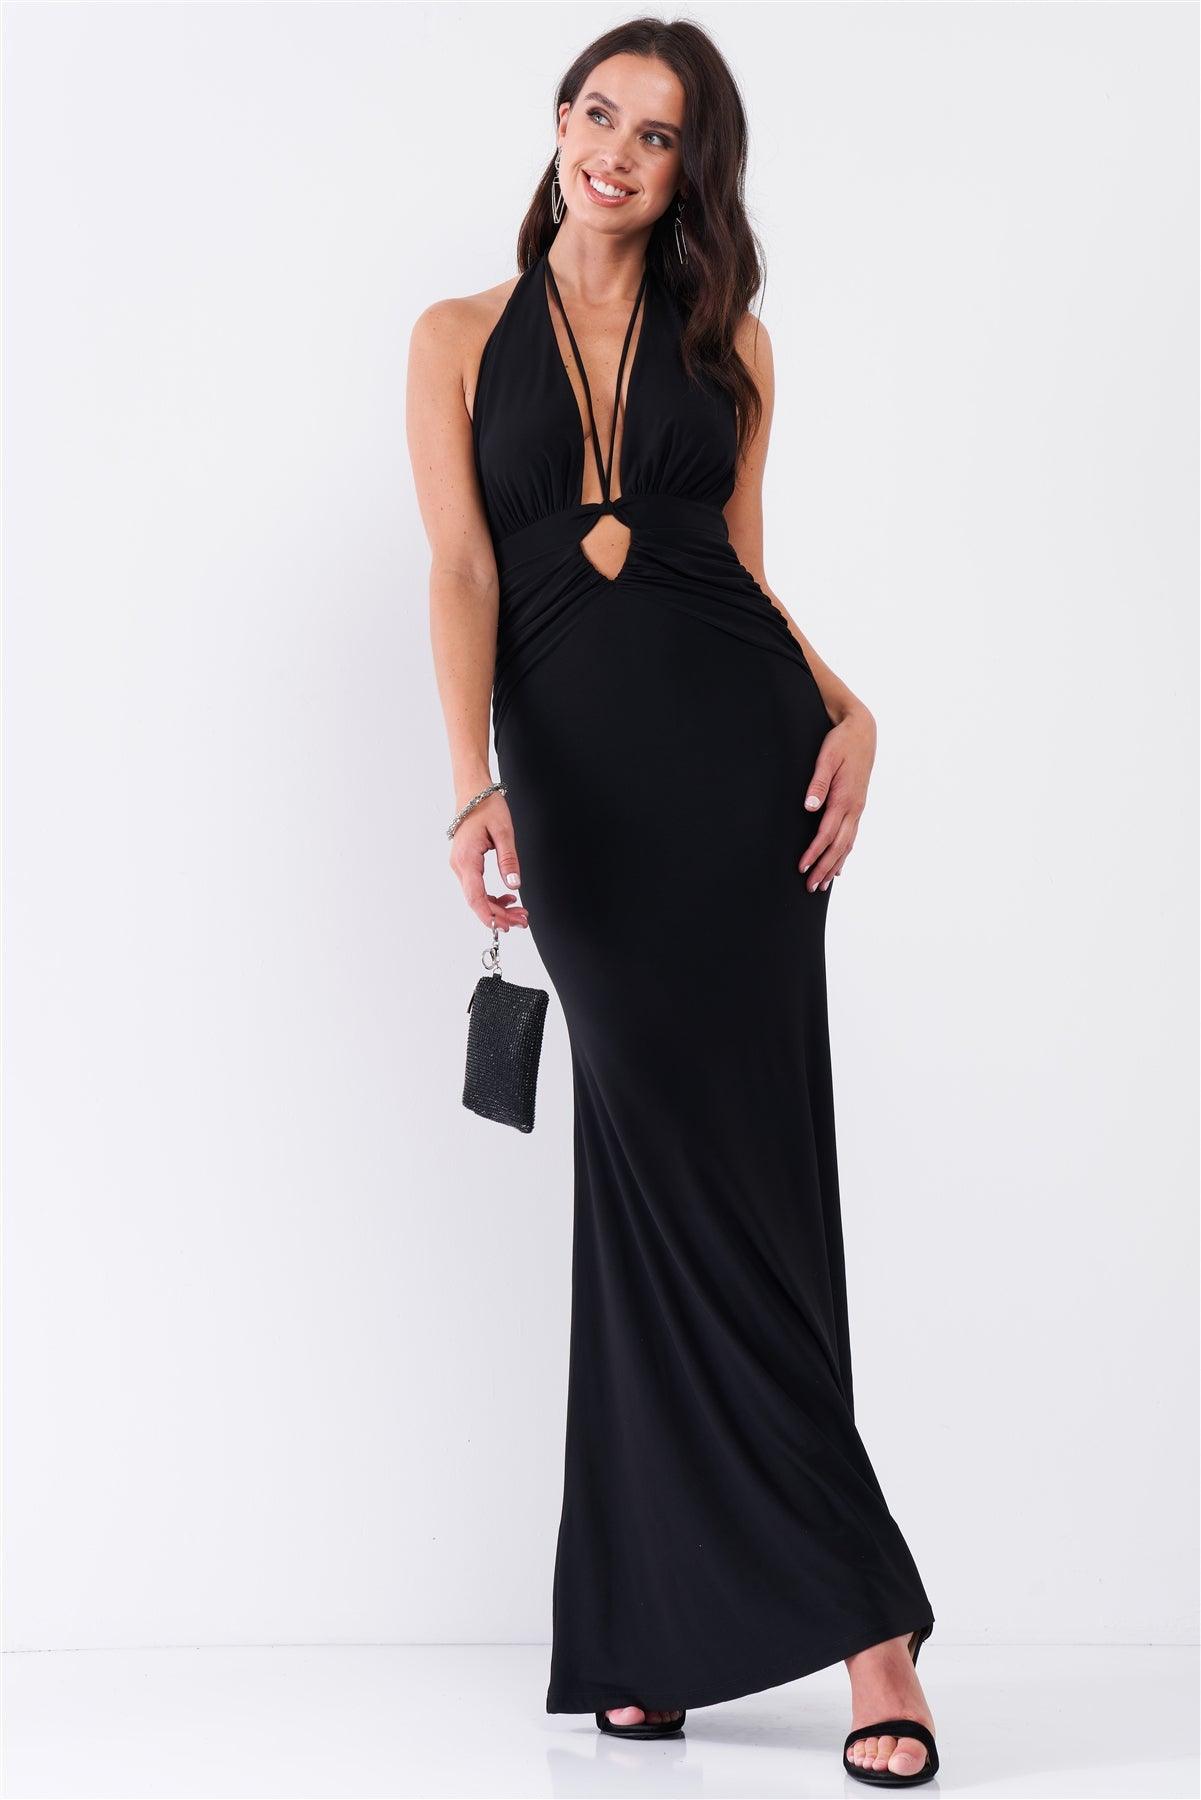 Black Halter Neck Front Cut Out Detail Ruched Self-Tie Long Straps Open Back Mermaid Maxi Dress /3-2-1